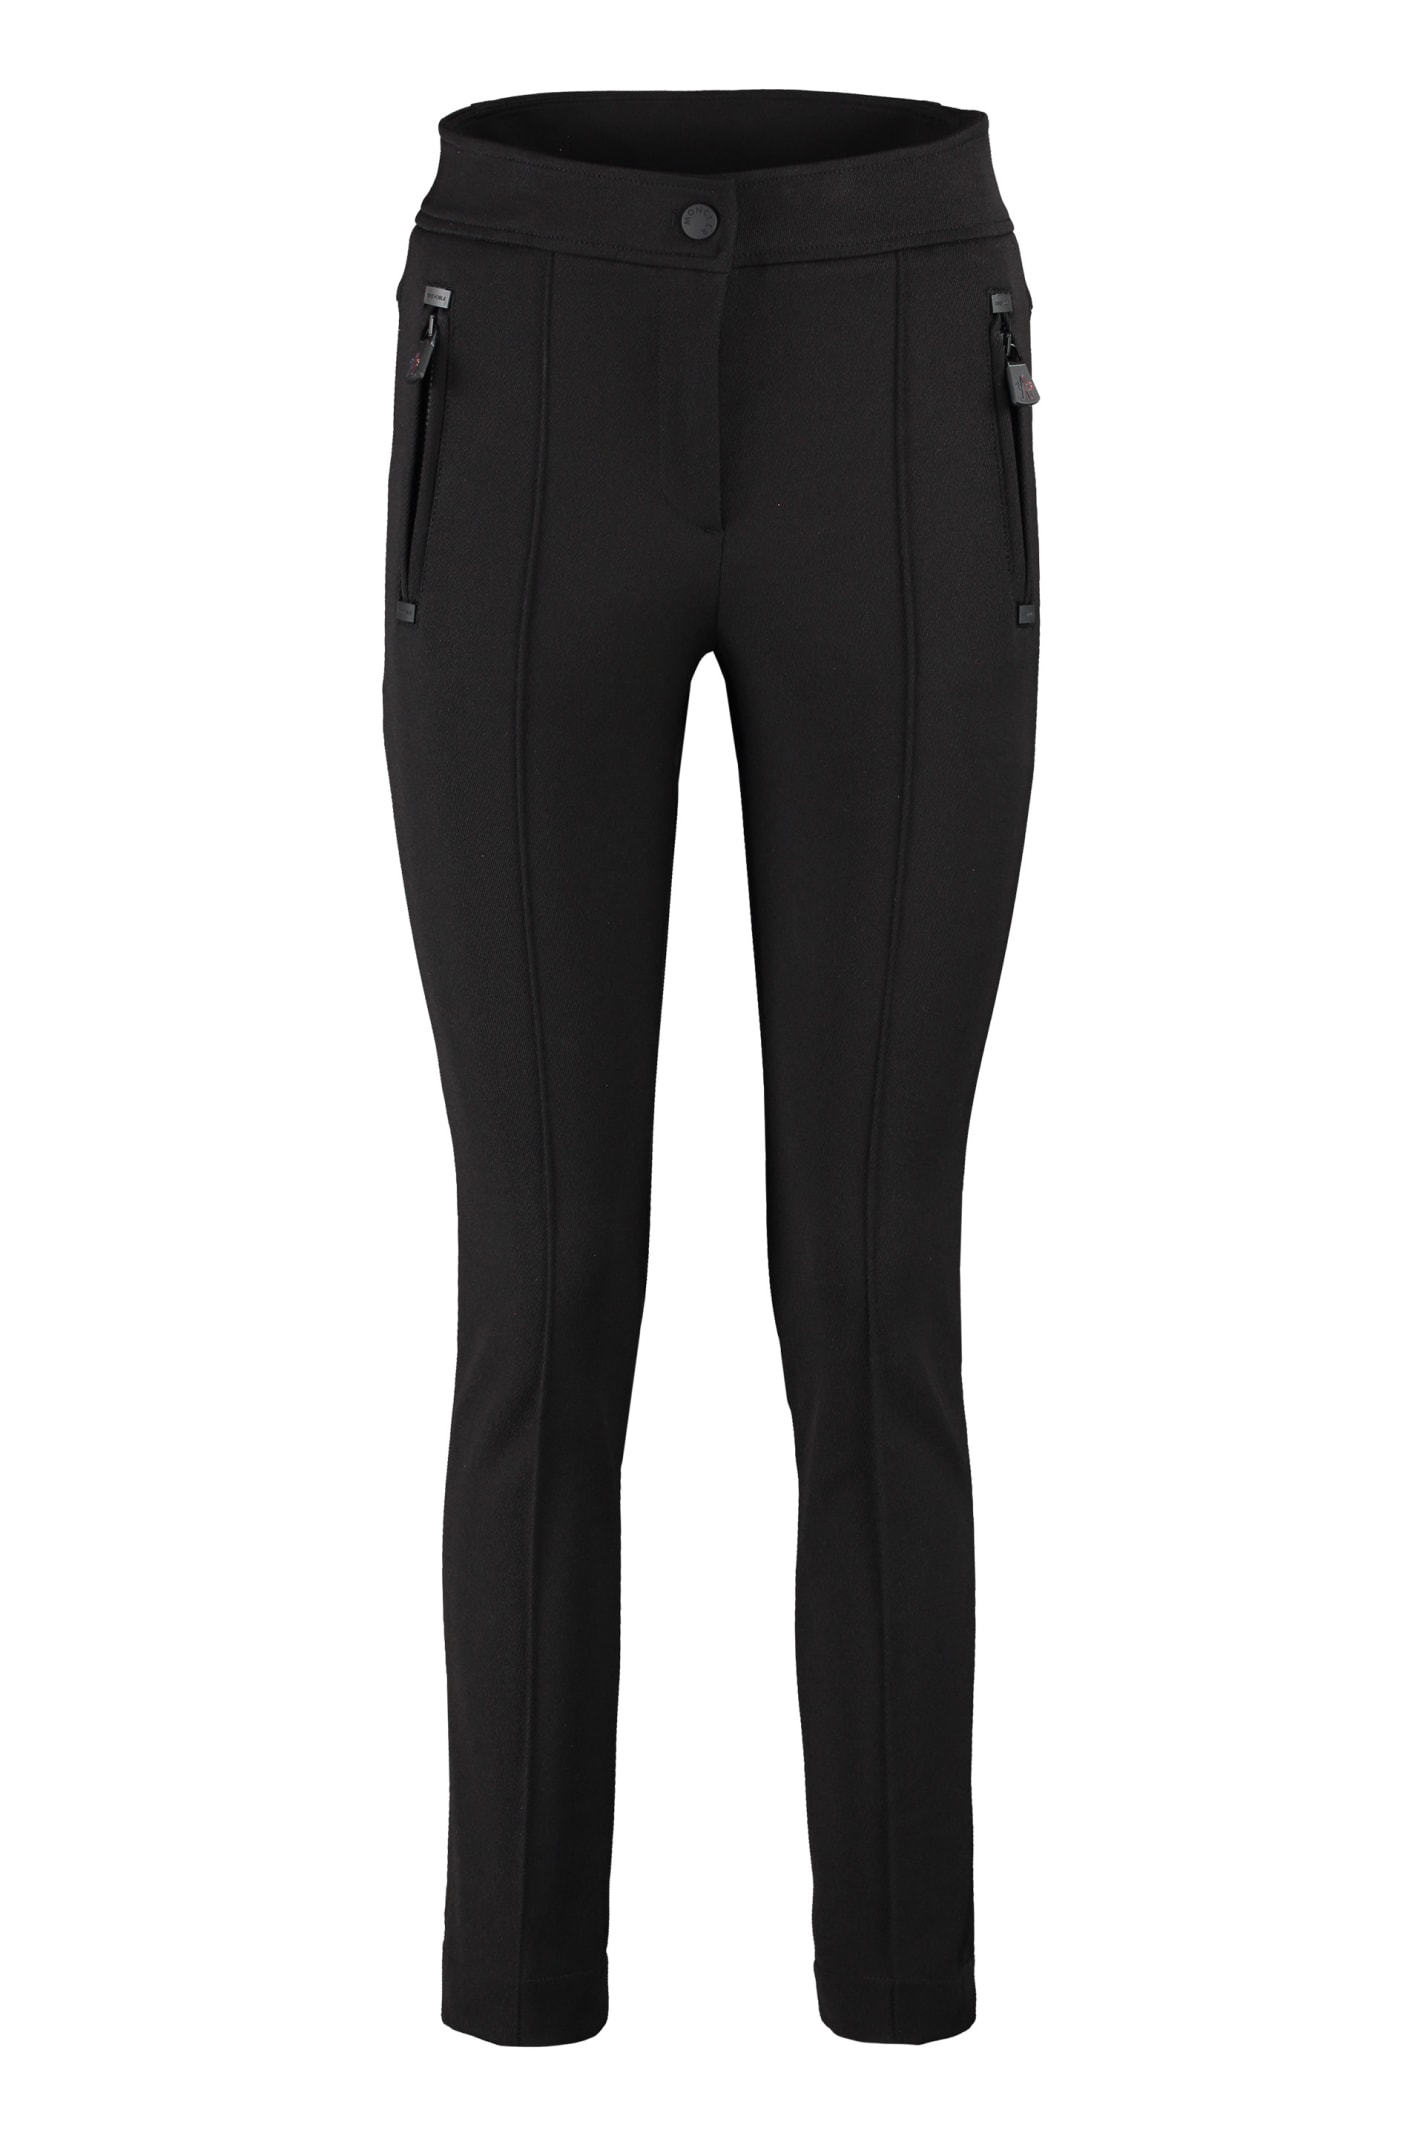 Moncler Stretch Cigarette Trousers